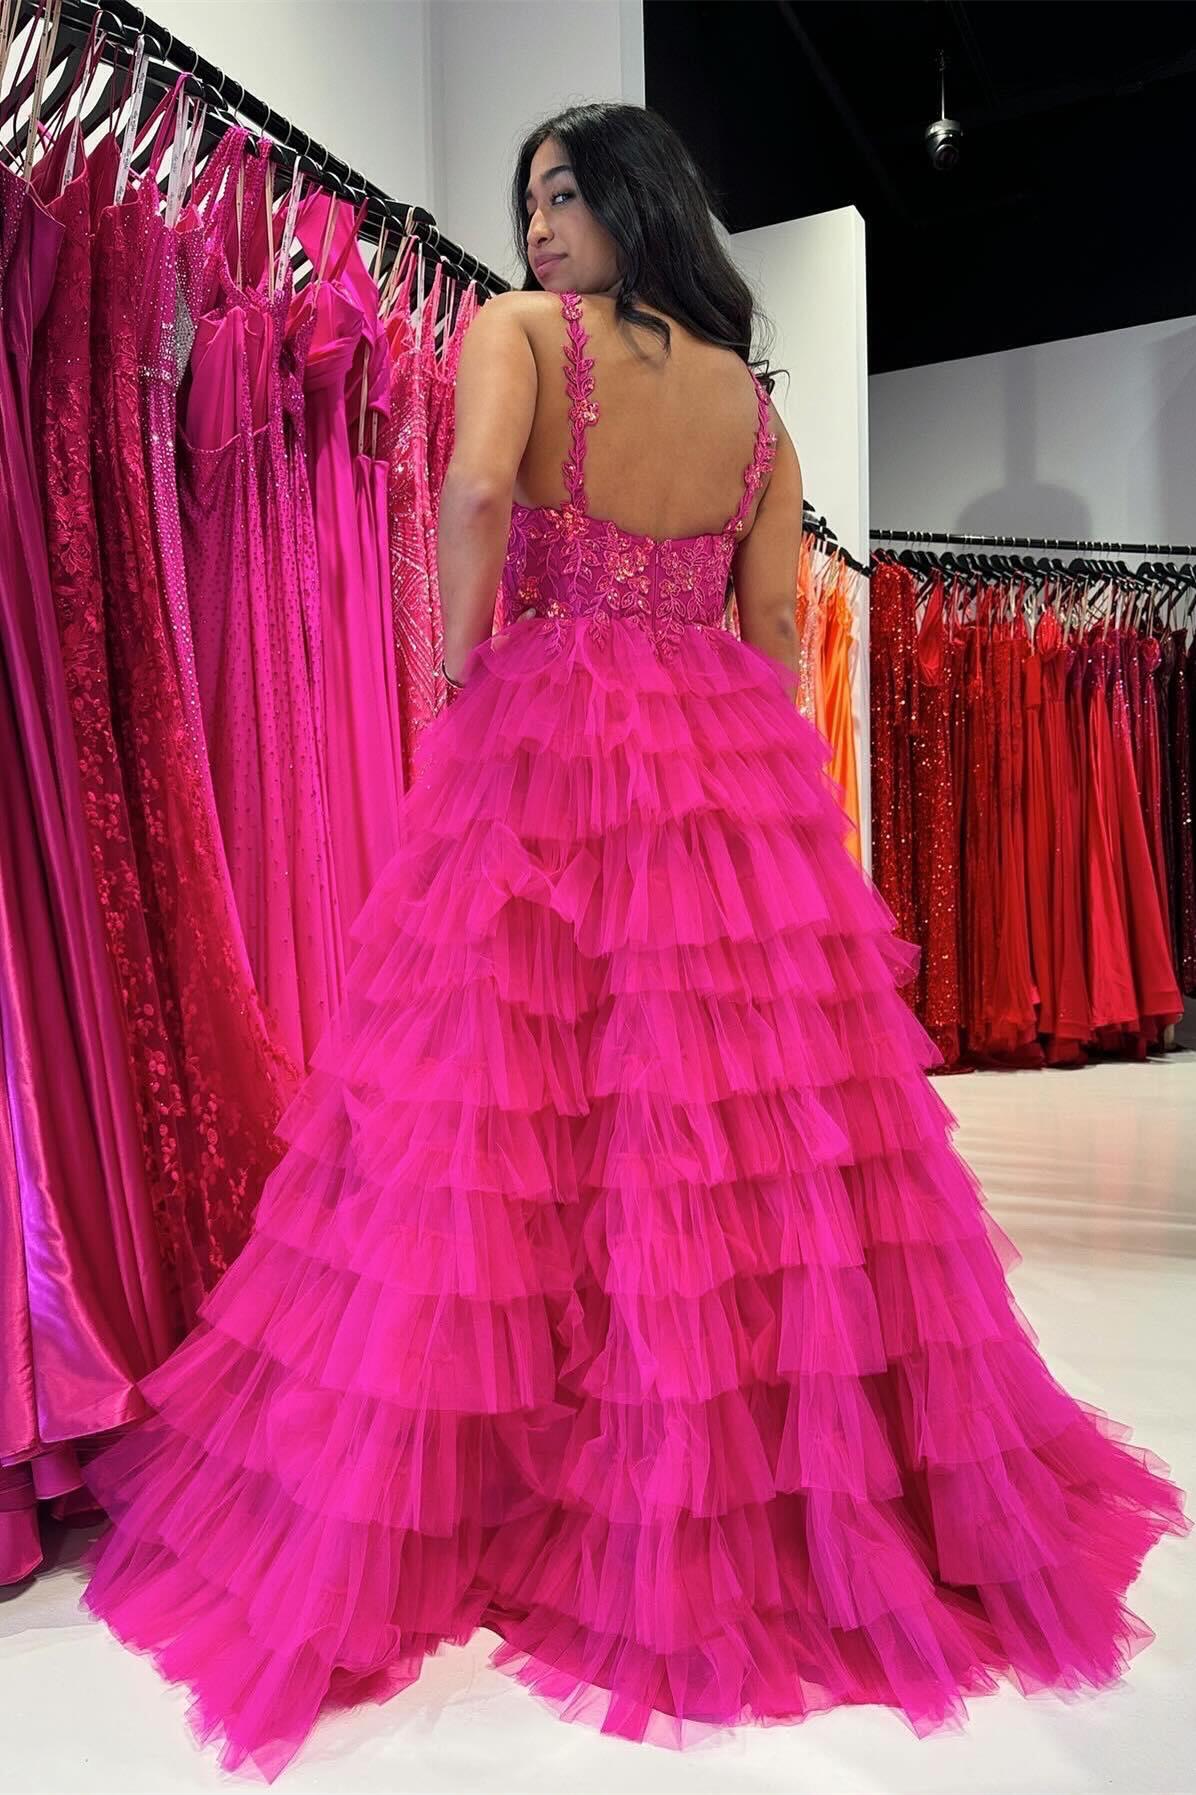 Fuchsia Layers Floral Tulle A-line Long Prom Dress